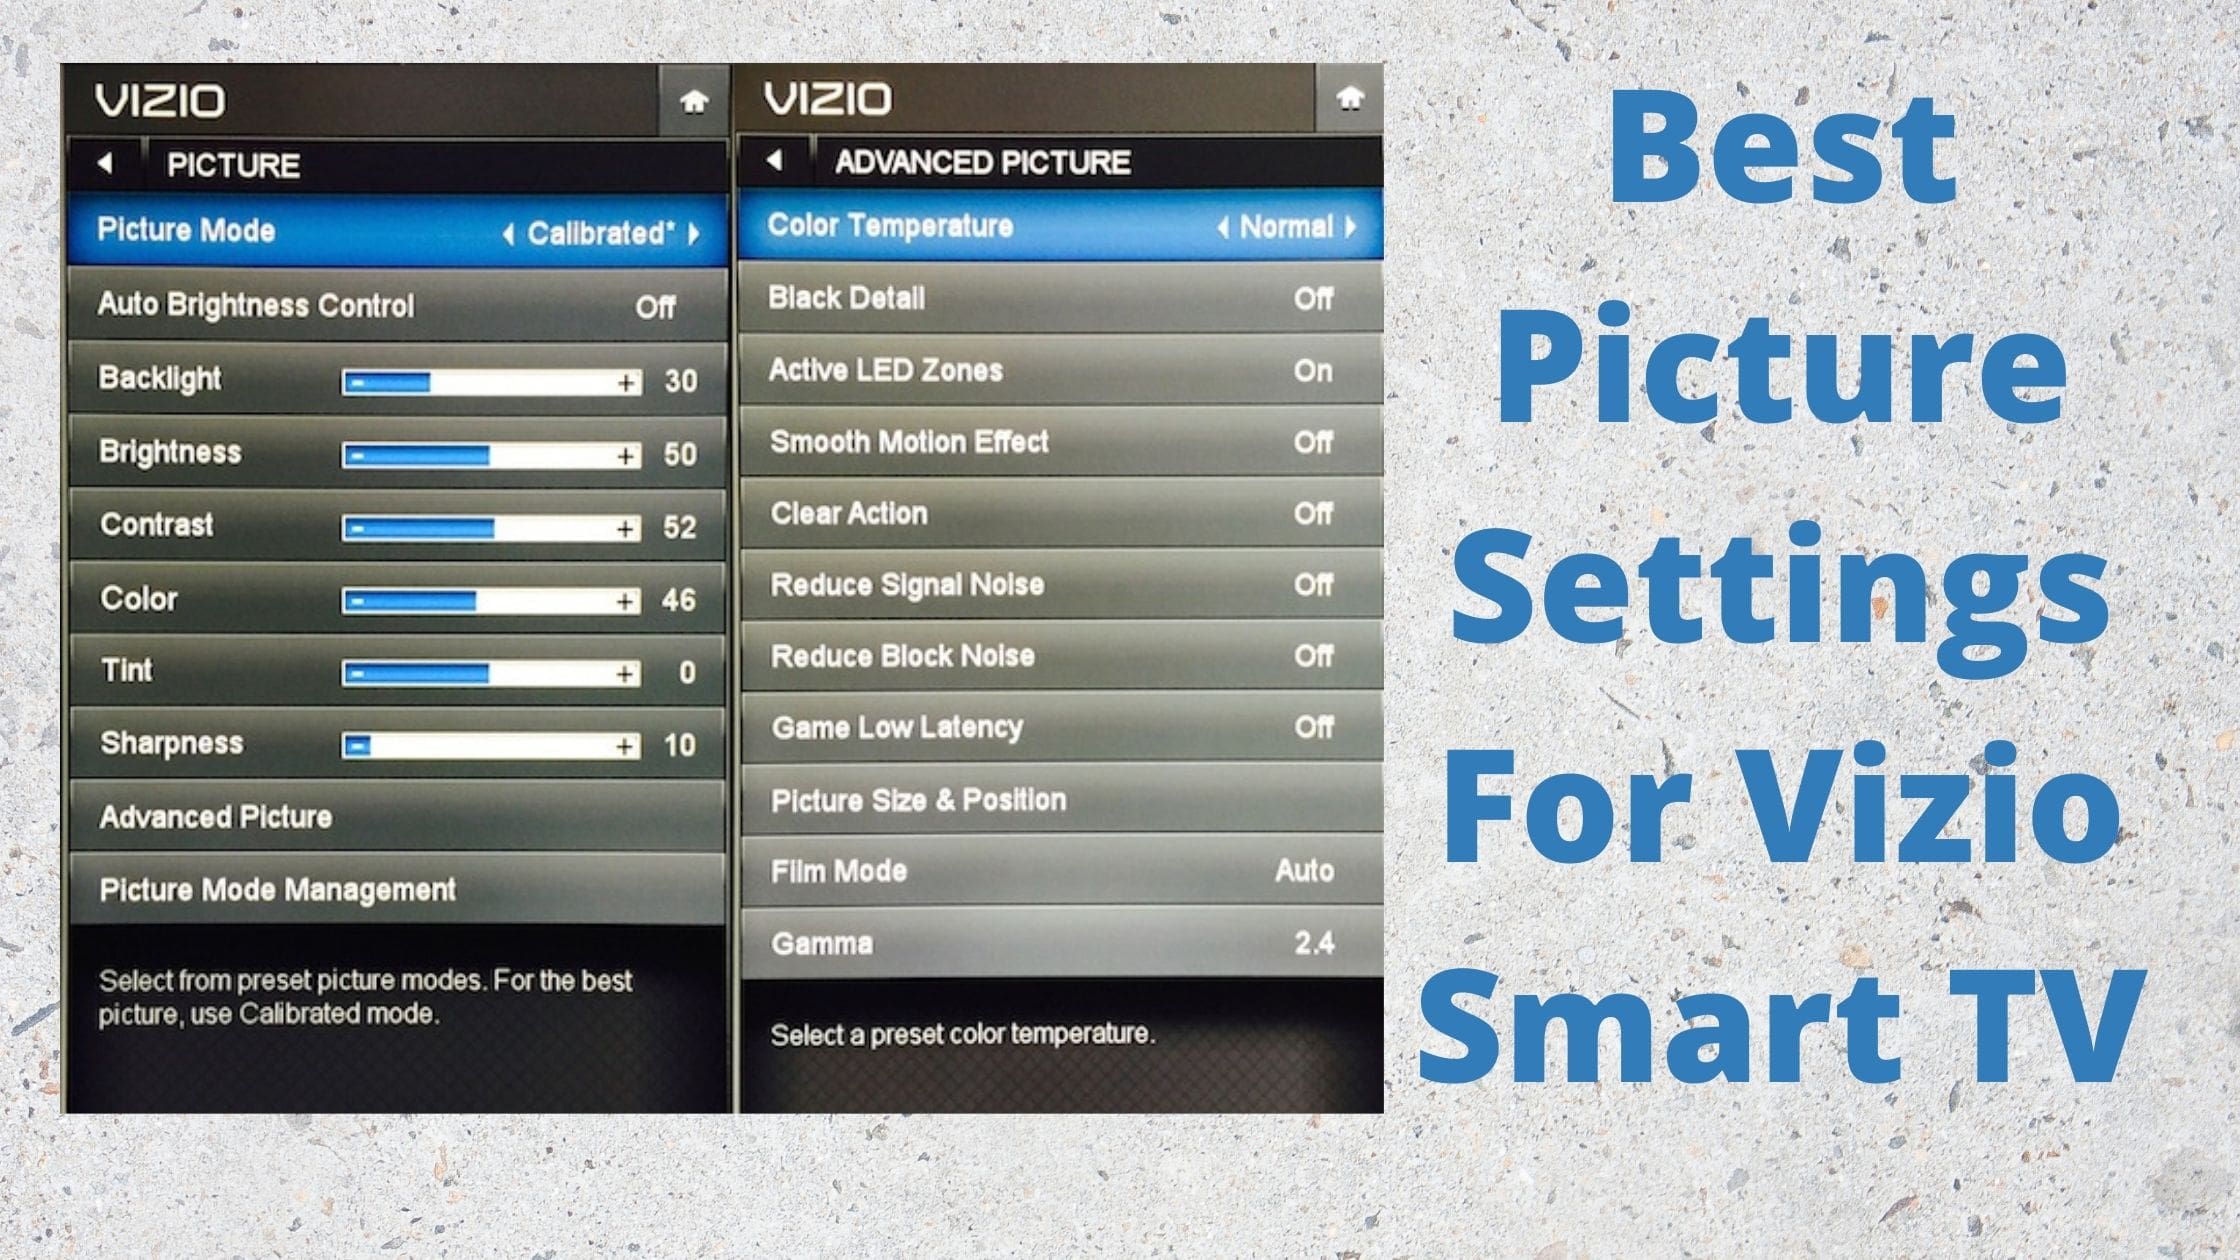 Best Picture Settings For Vizio Smart TV- For All Models